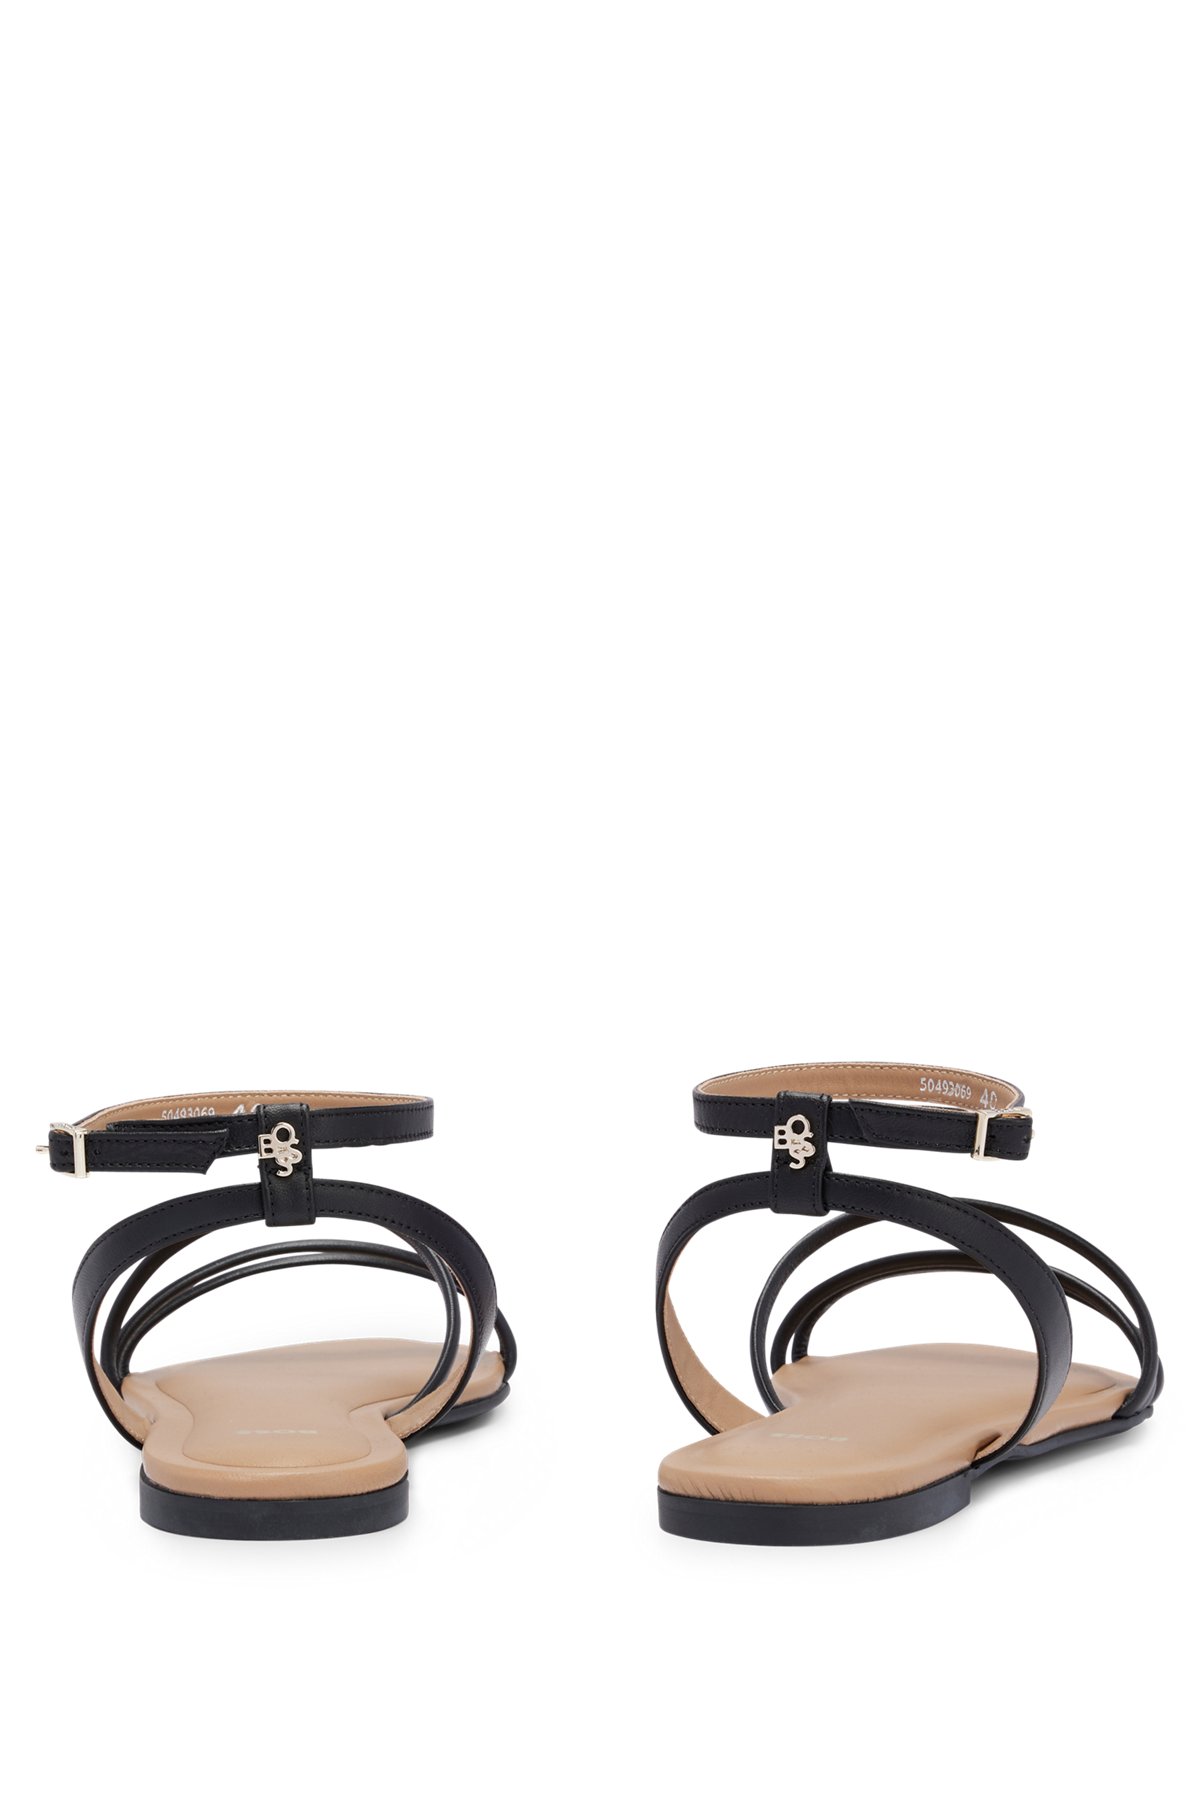 Nappa-leather strappy sandals with flat sole, Black